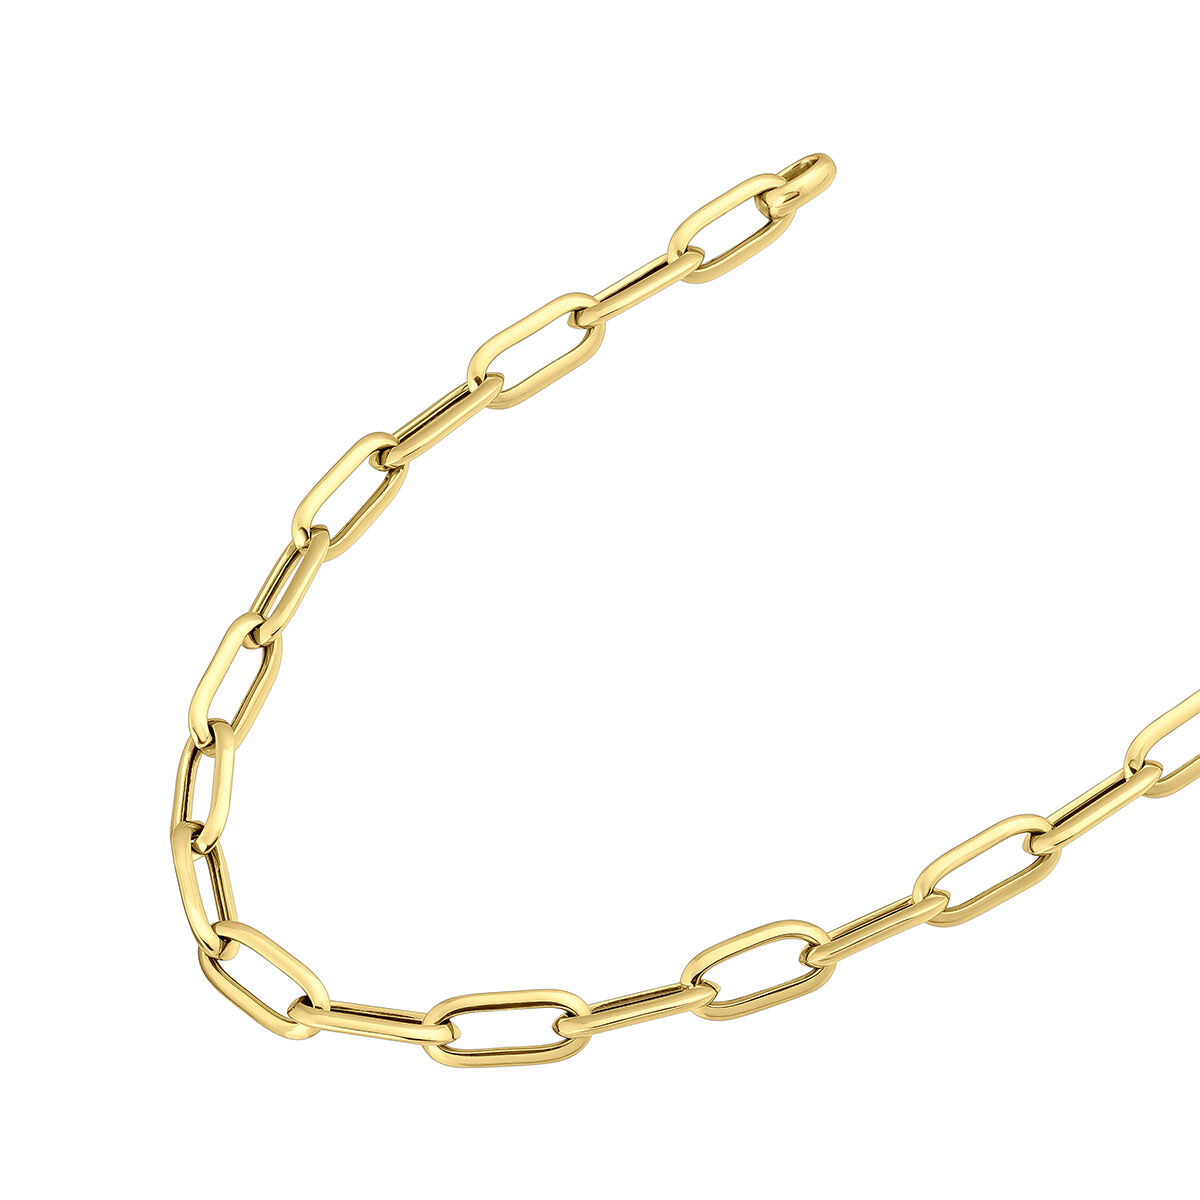 Rectangular cable link chain in 18k yellow gold-plated silver, J05340-02-45, hi-res